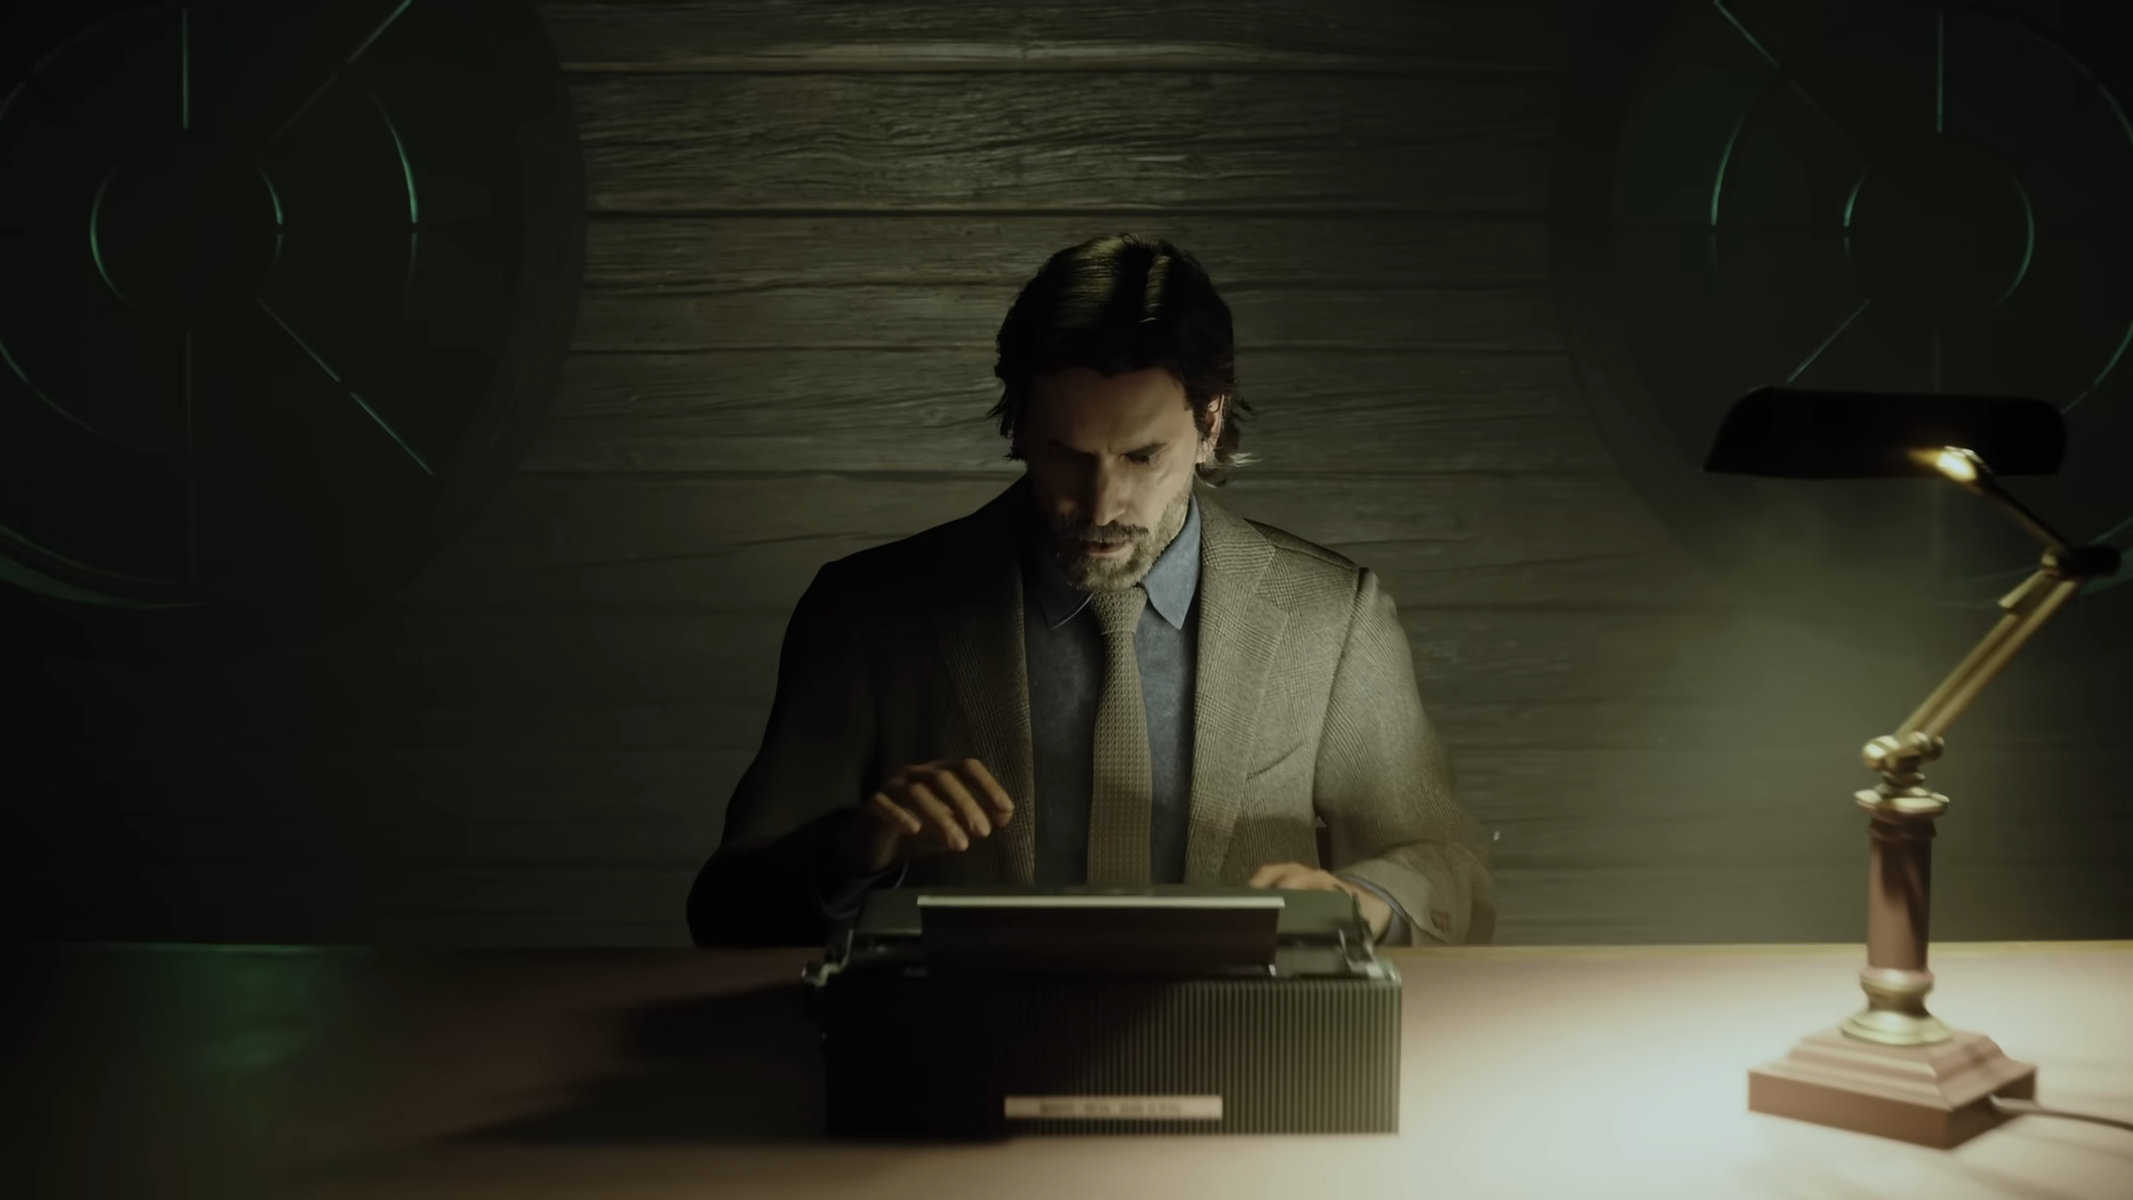 Alan Wake 2 release date, trailers, story, and gameplay